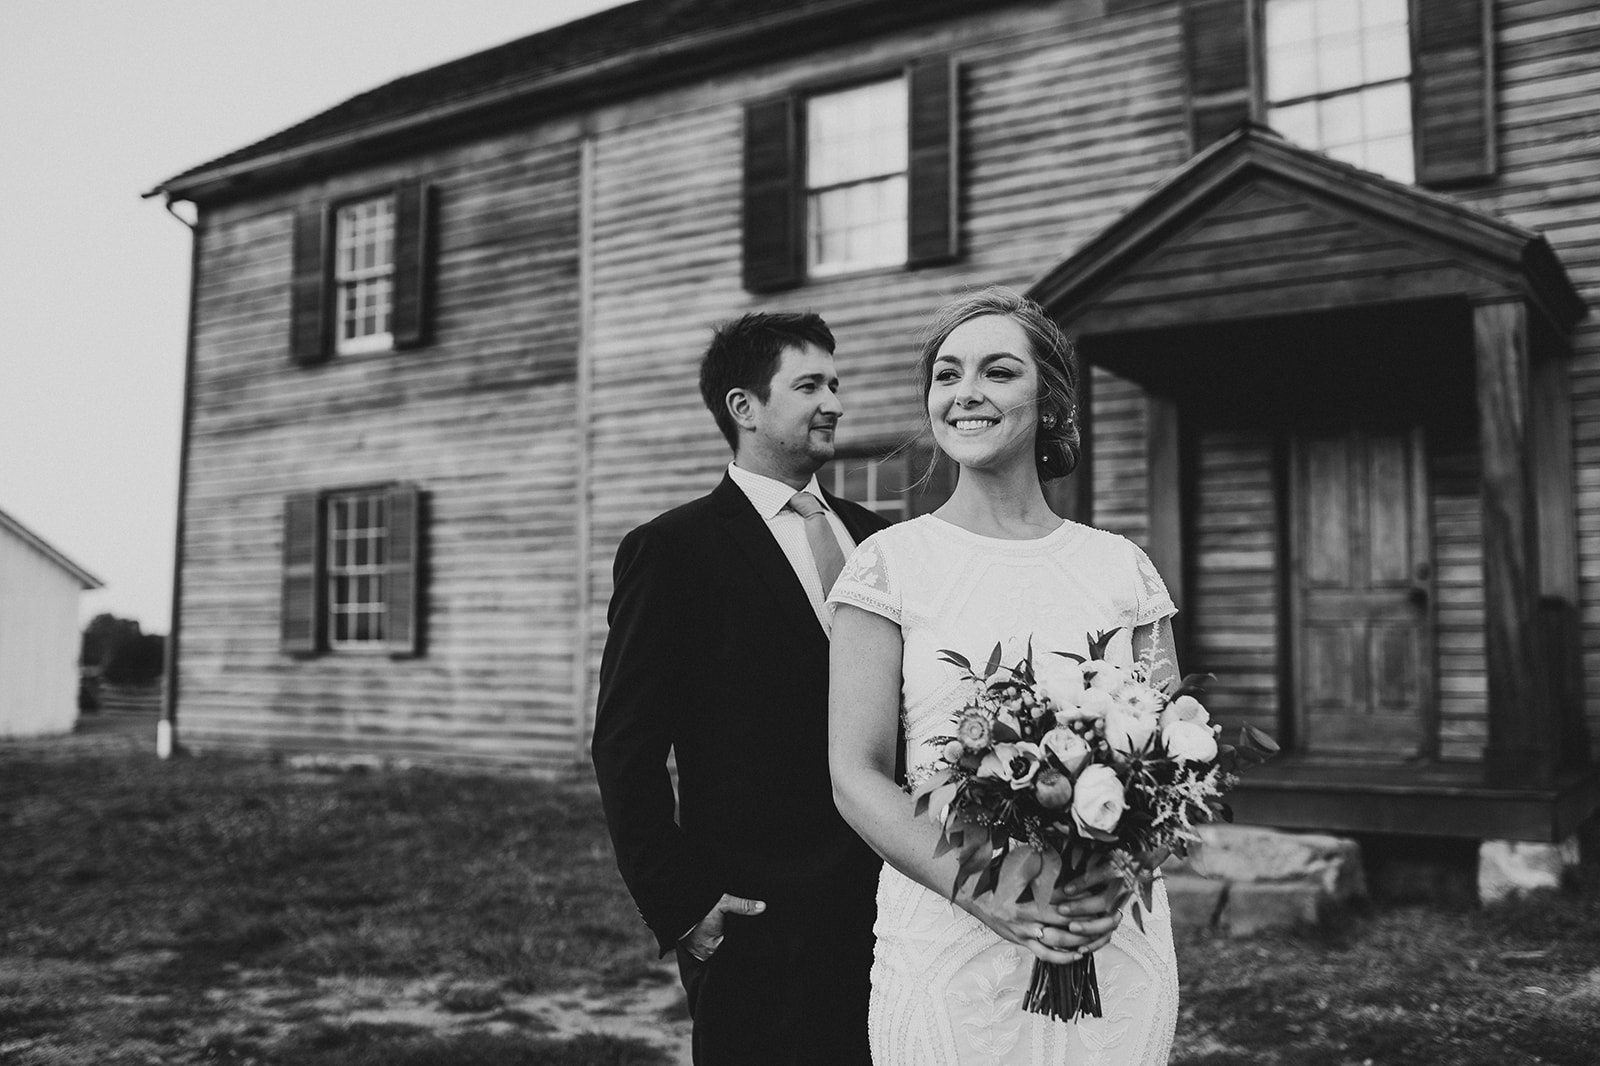 Candid shot of the bride and groom sharing a tender moment during their elopement photoshoot at Manassas Battlefield Par